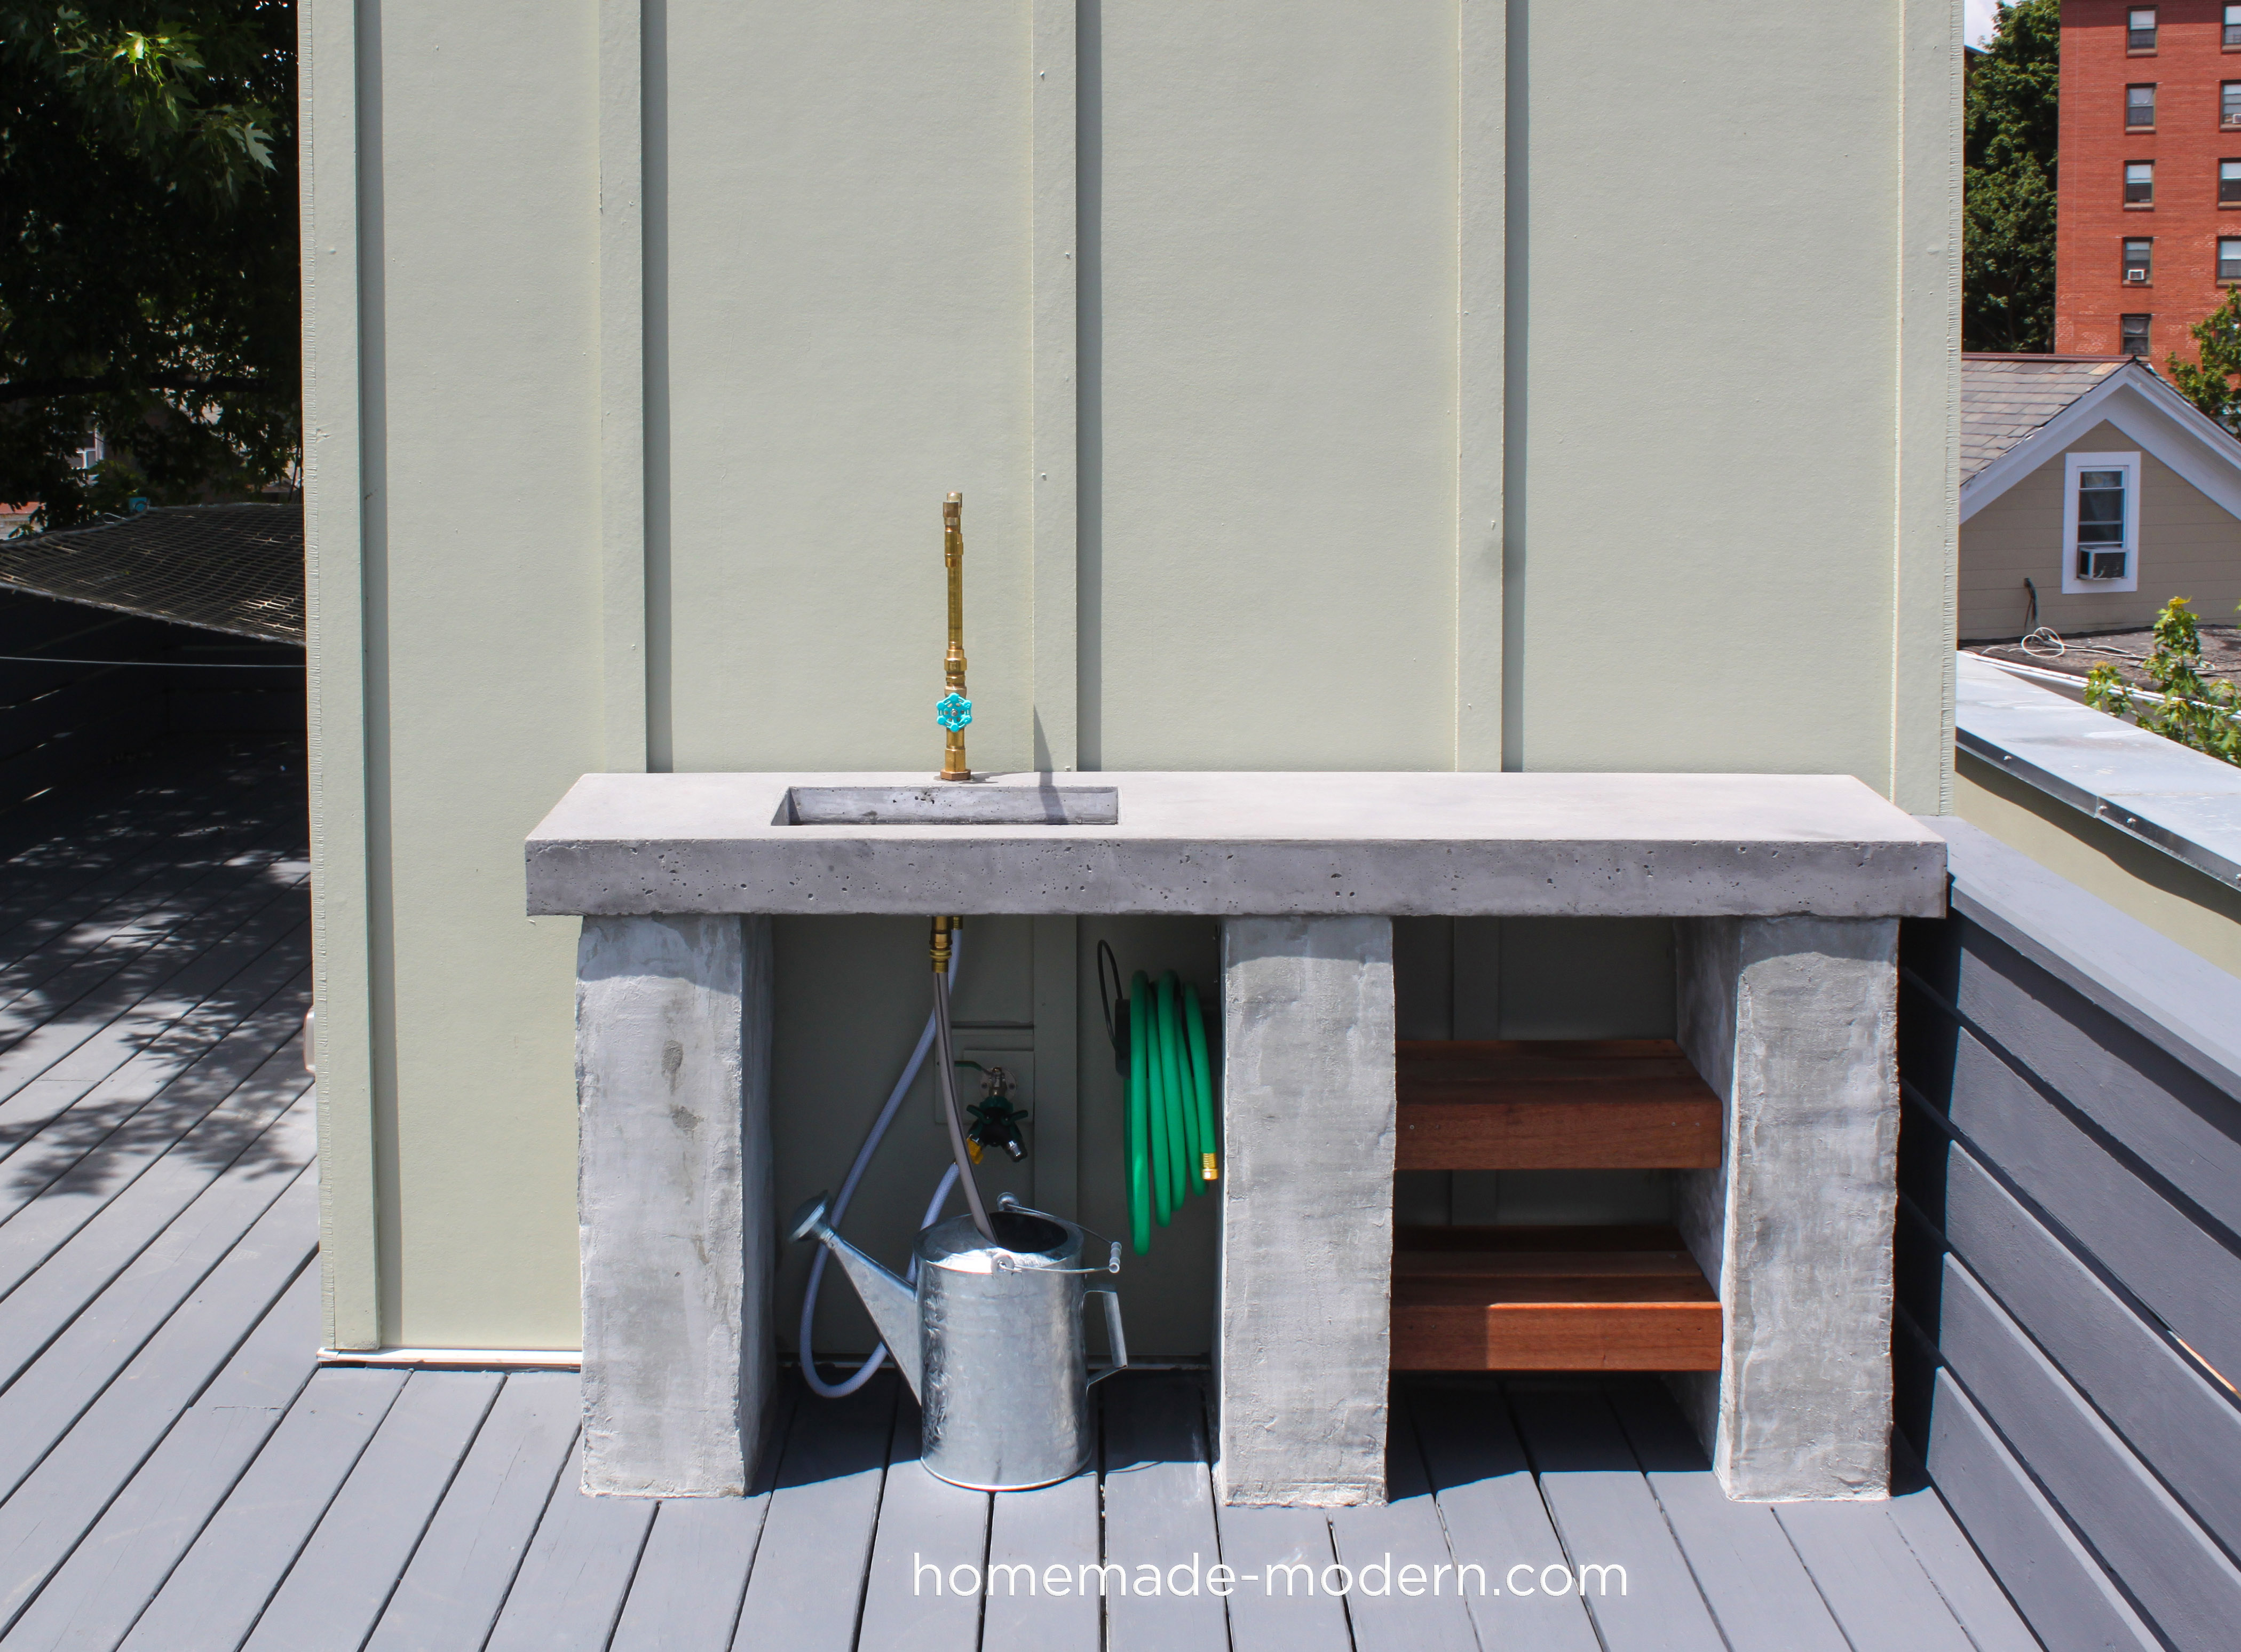 This DIY Outdoor Kitchen with Concrete Countertop is convenient for your deck, patio or outdoor garden. Full instructions can be found at HomeDepot.com